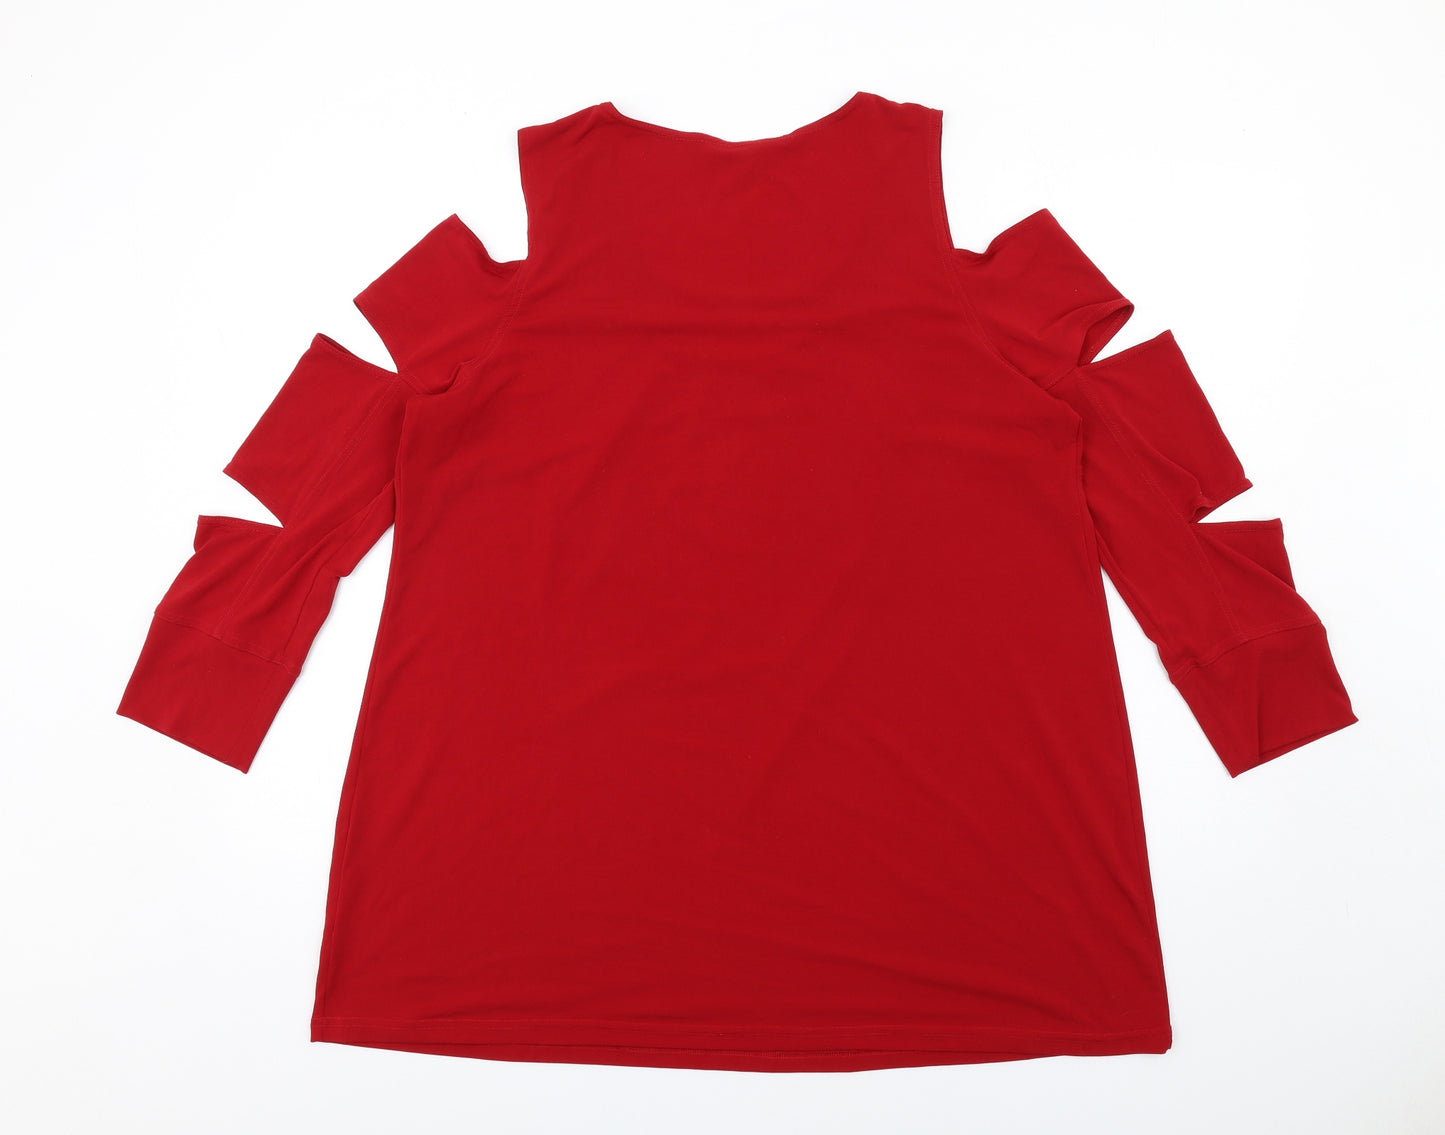 Glamros Womens Red Polyester Basic T-Shirt Size 20 Round Neck - Cut Out Detail